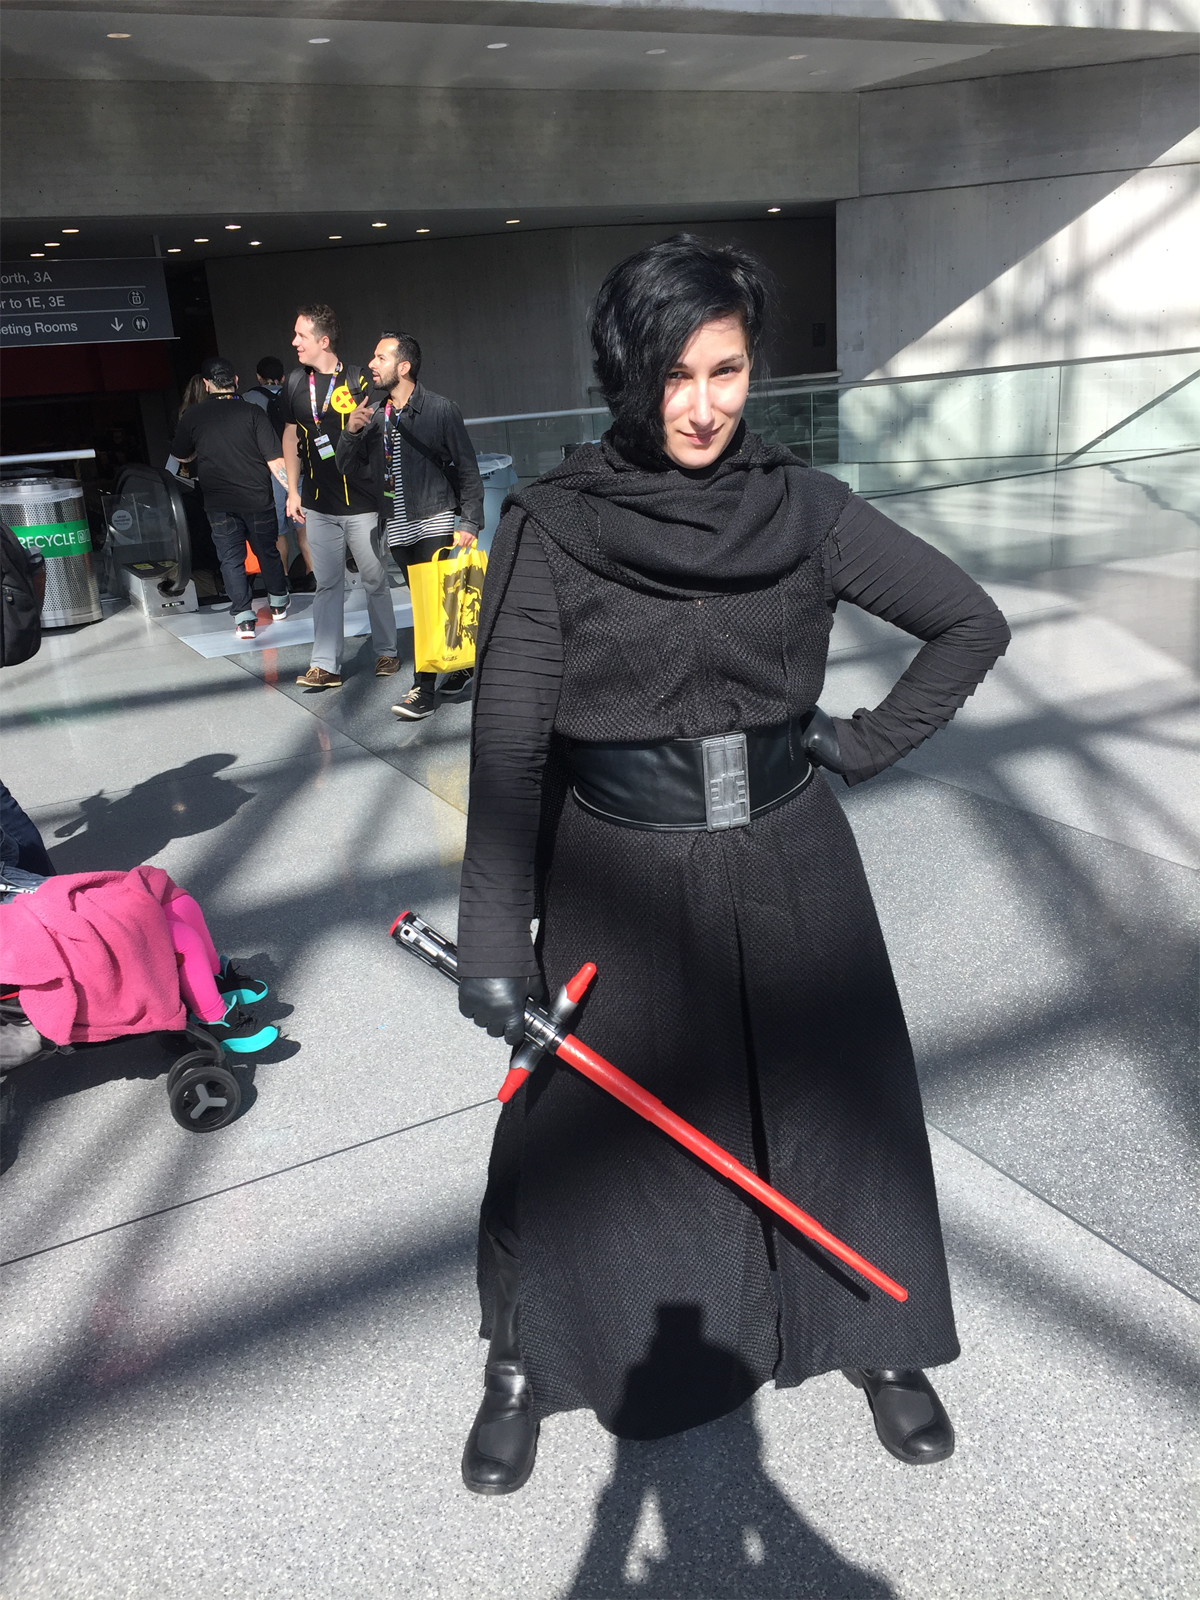 The Most Incredible Cosplay Of New York Comic Con, Day One